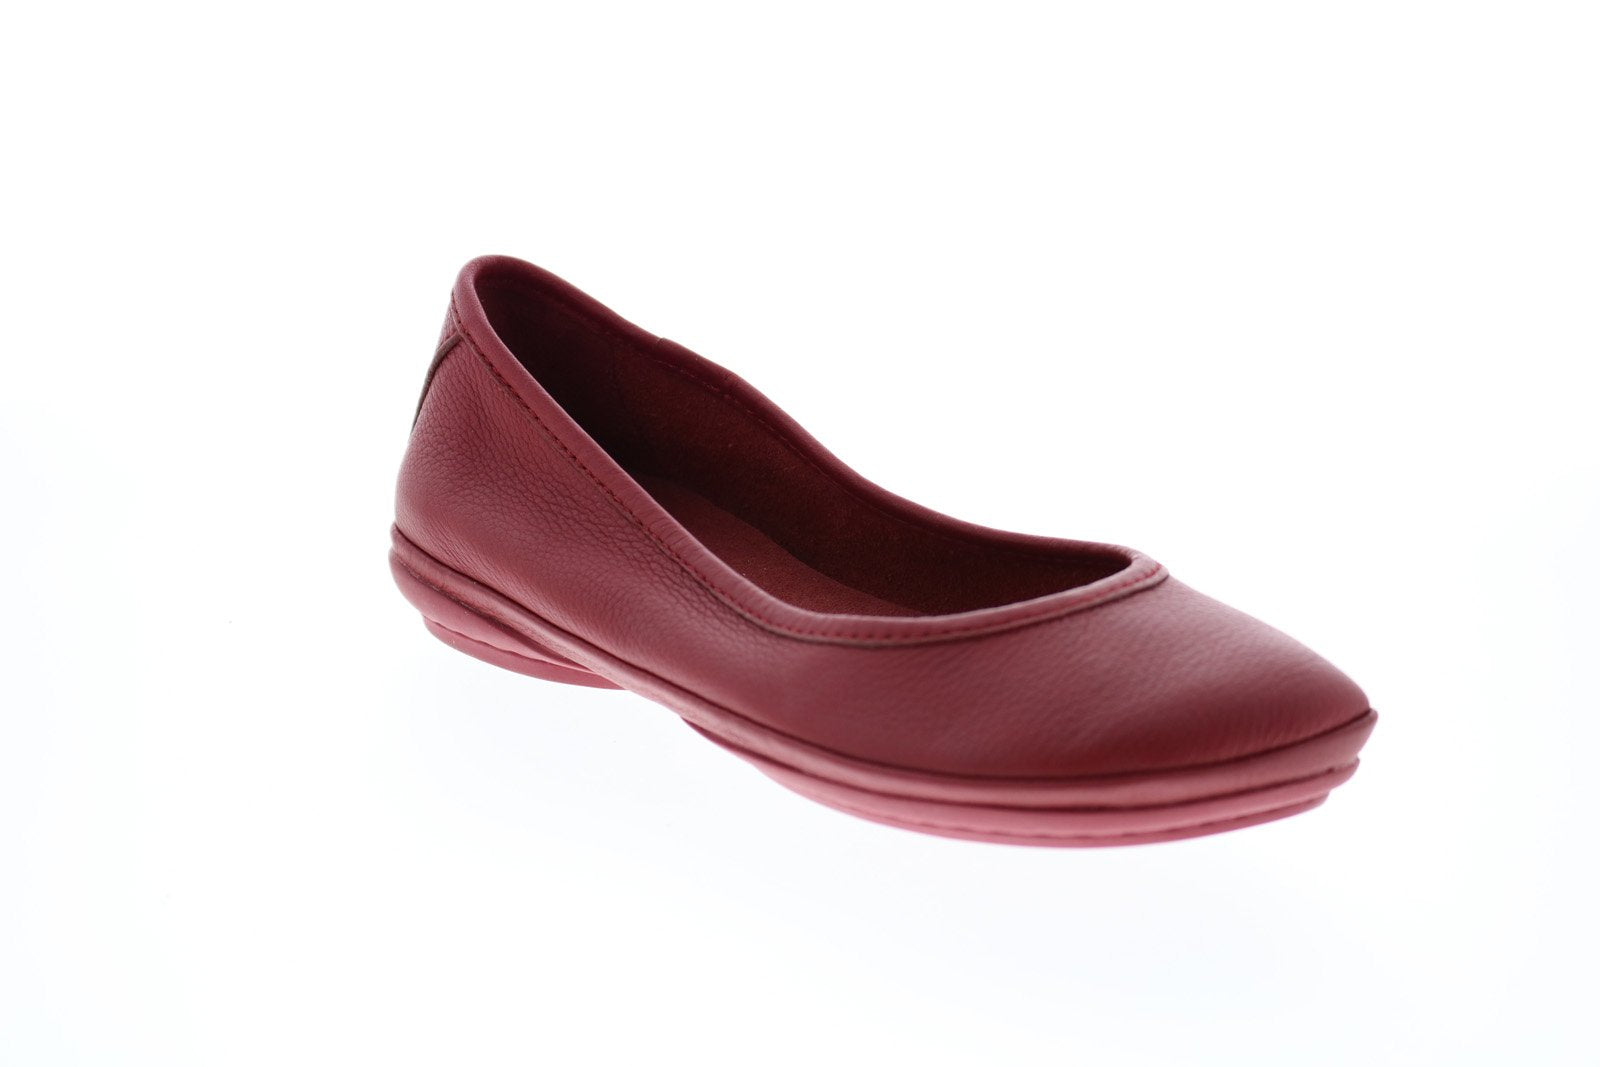 Camper Right Nina K200387-013 Womens Red Leather Slip On Flats Ballet ...